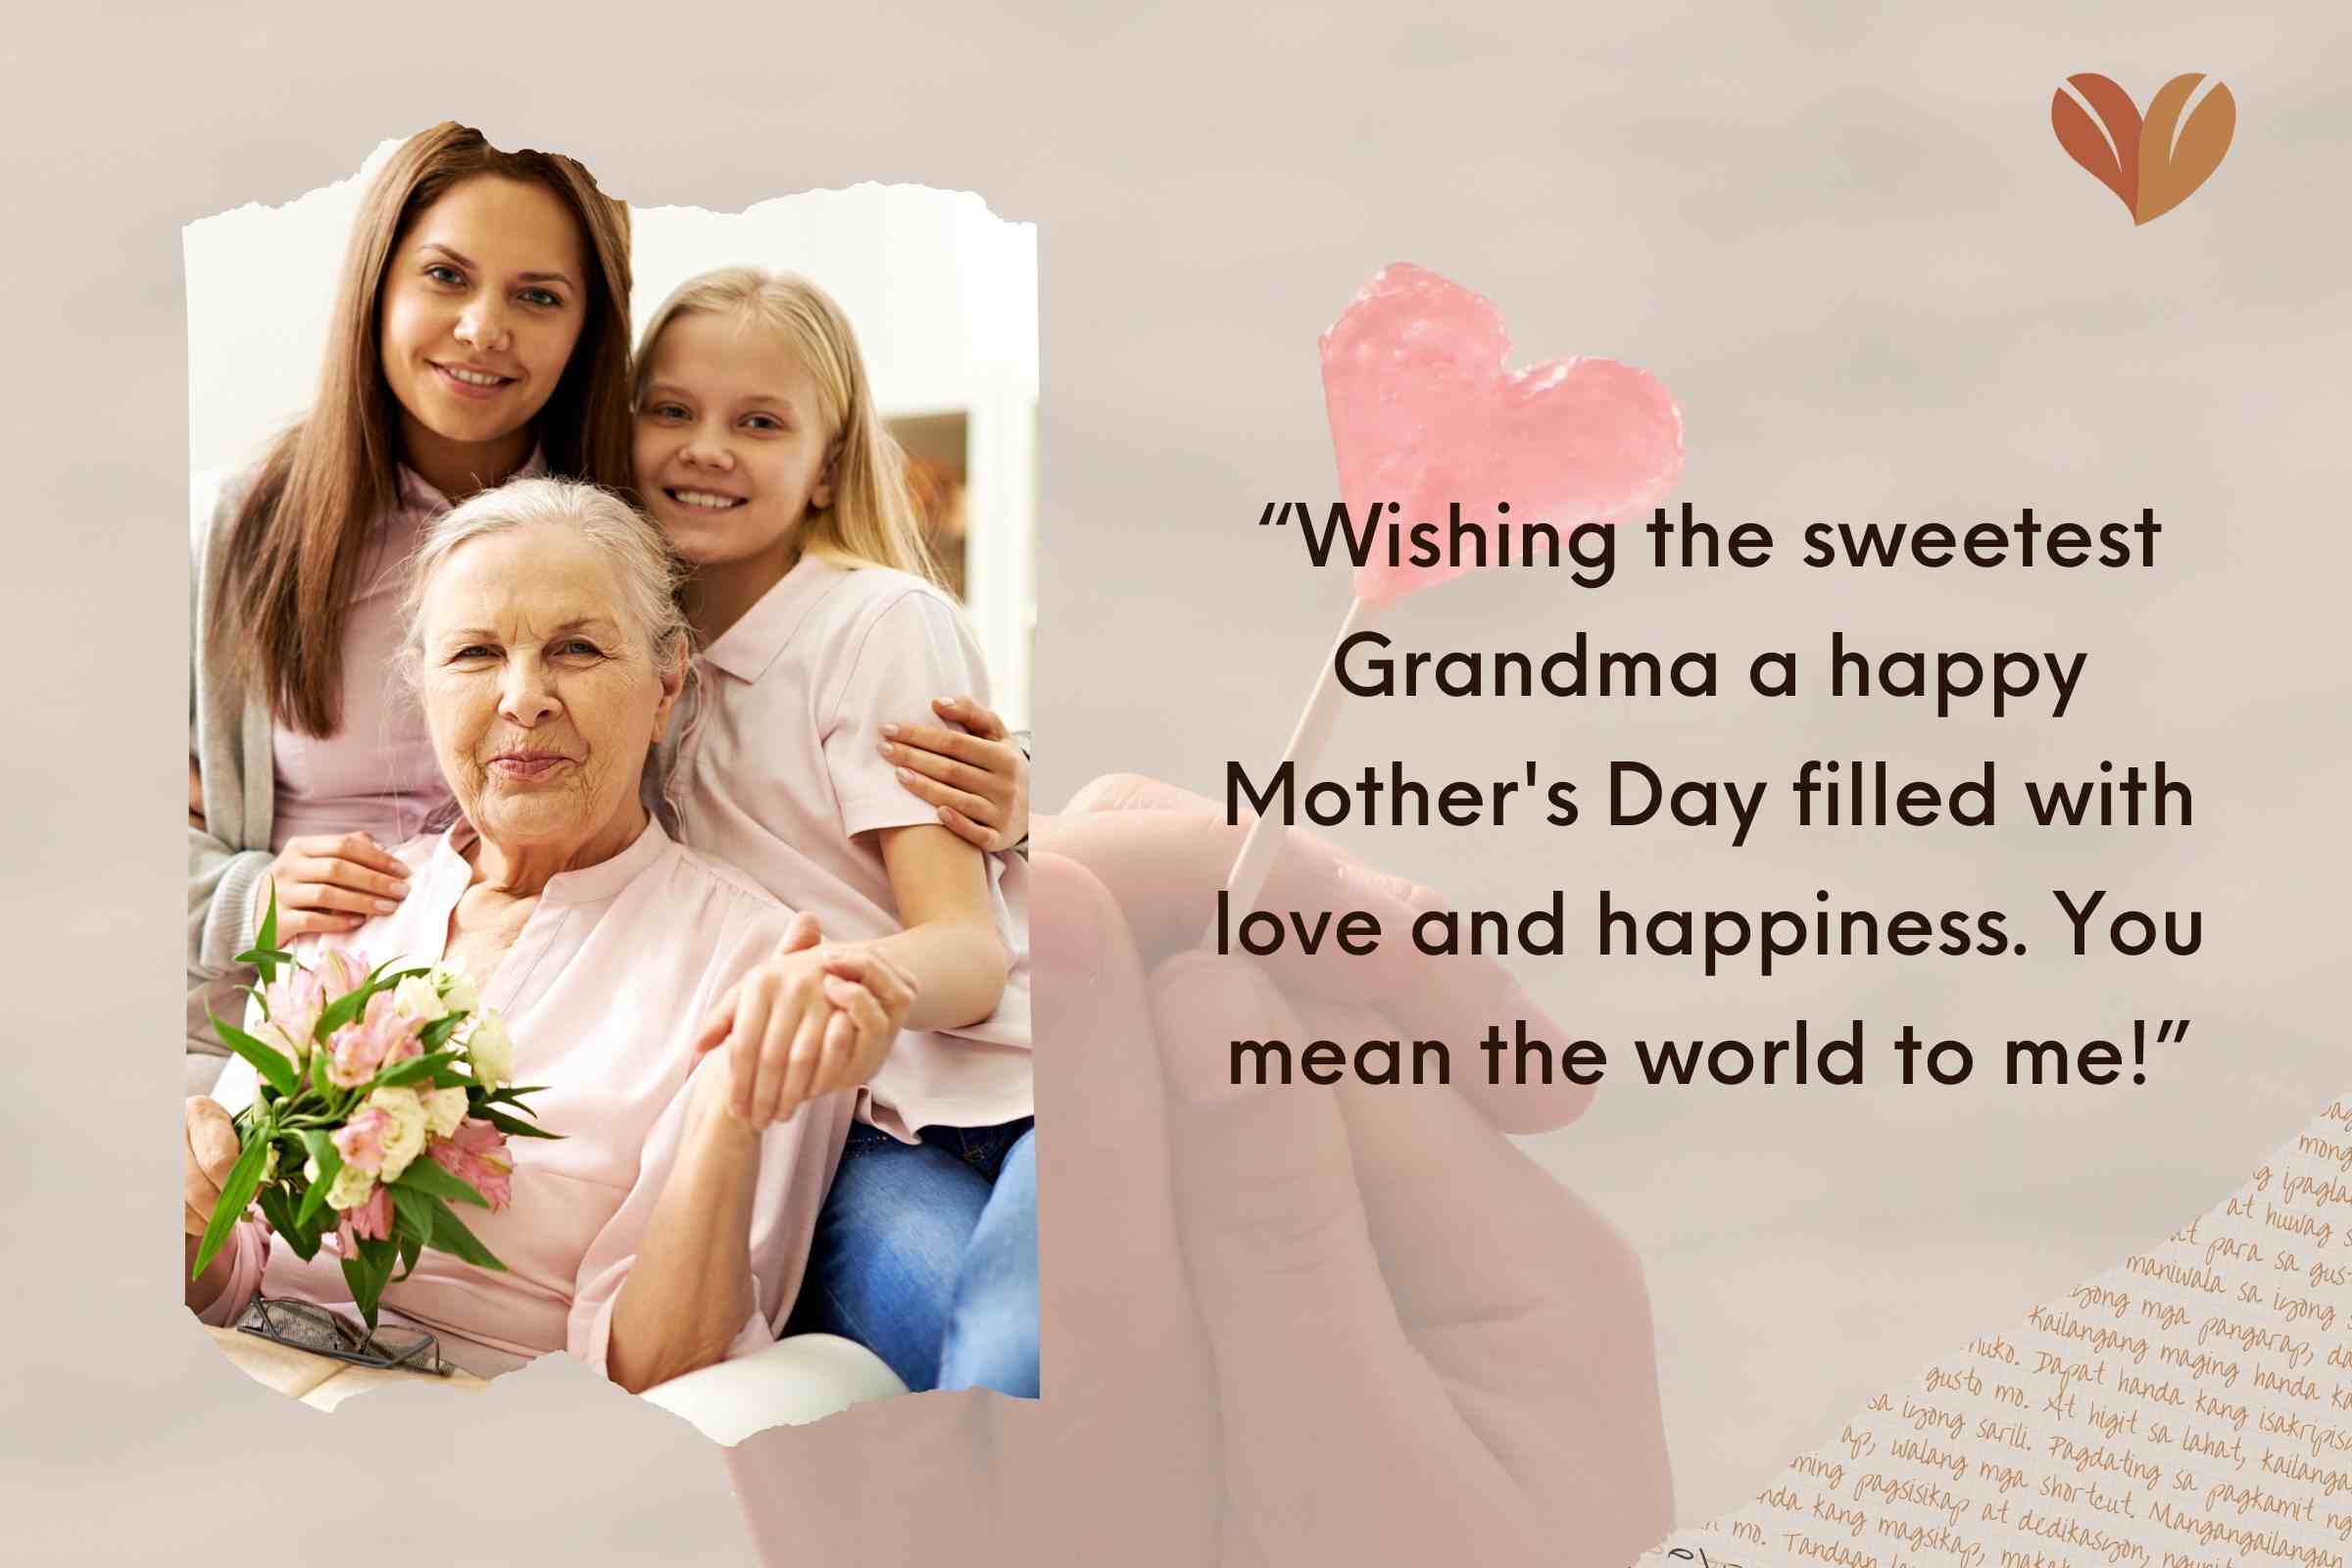 The Sweetest Mother's Day Messages for Grandma From Your Little One